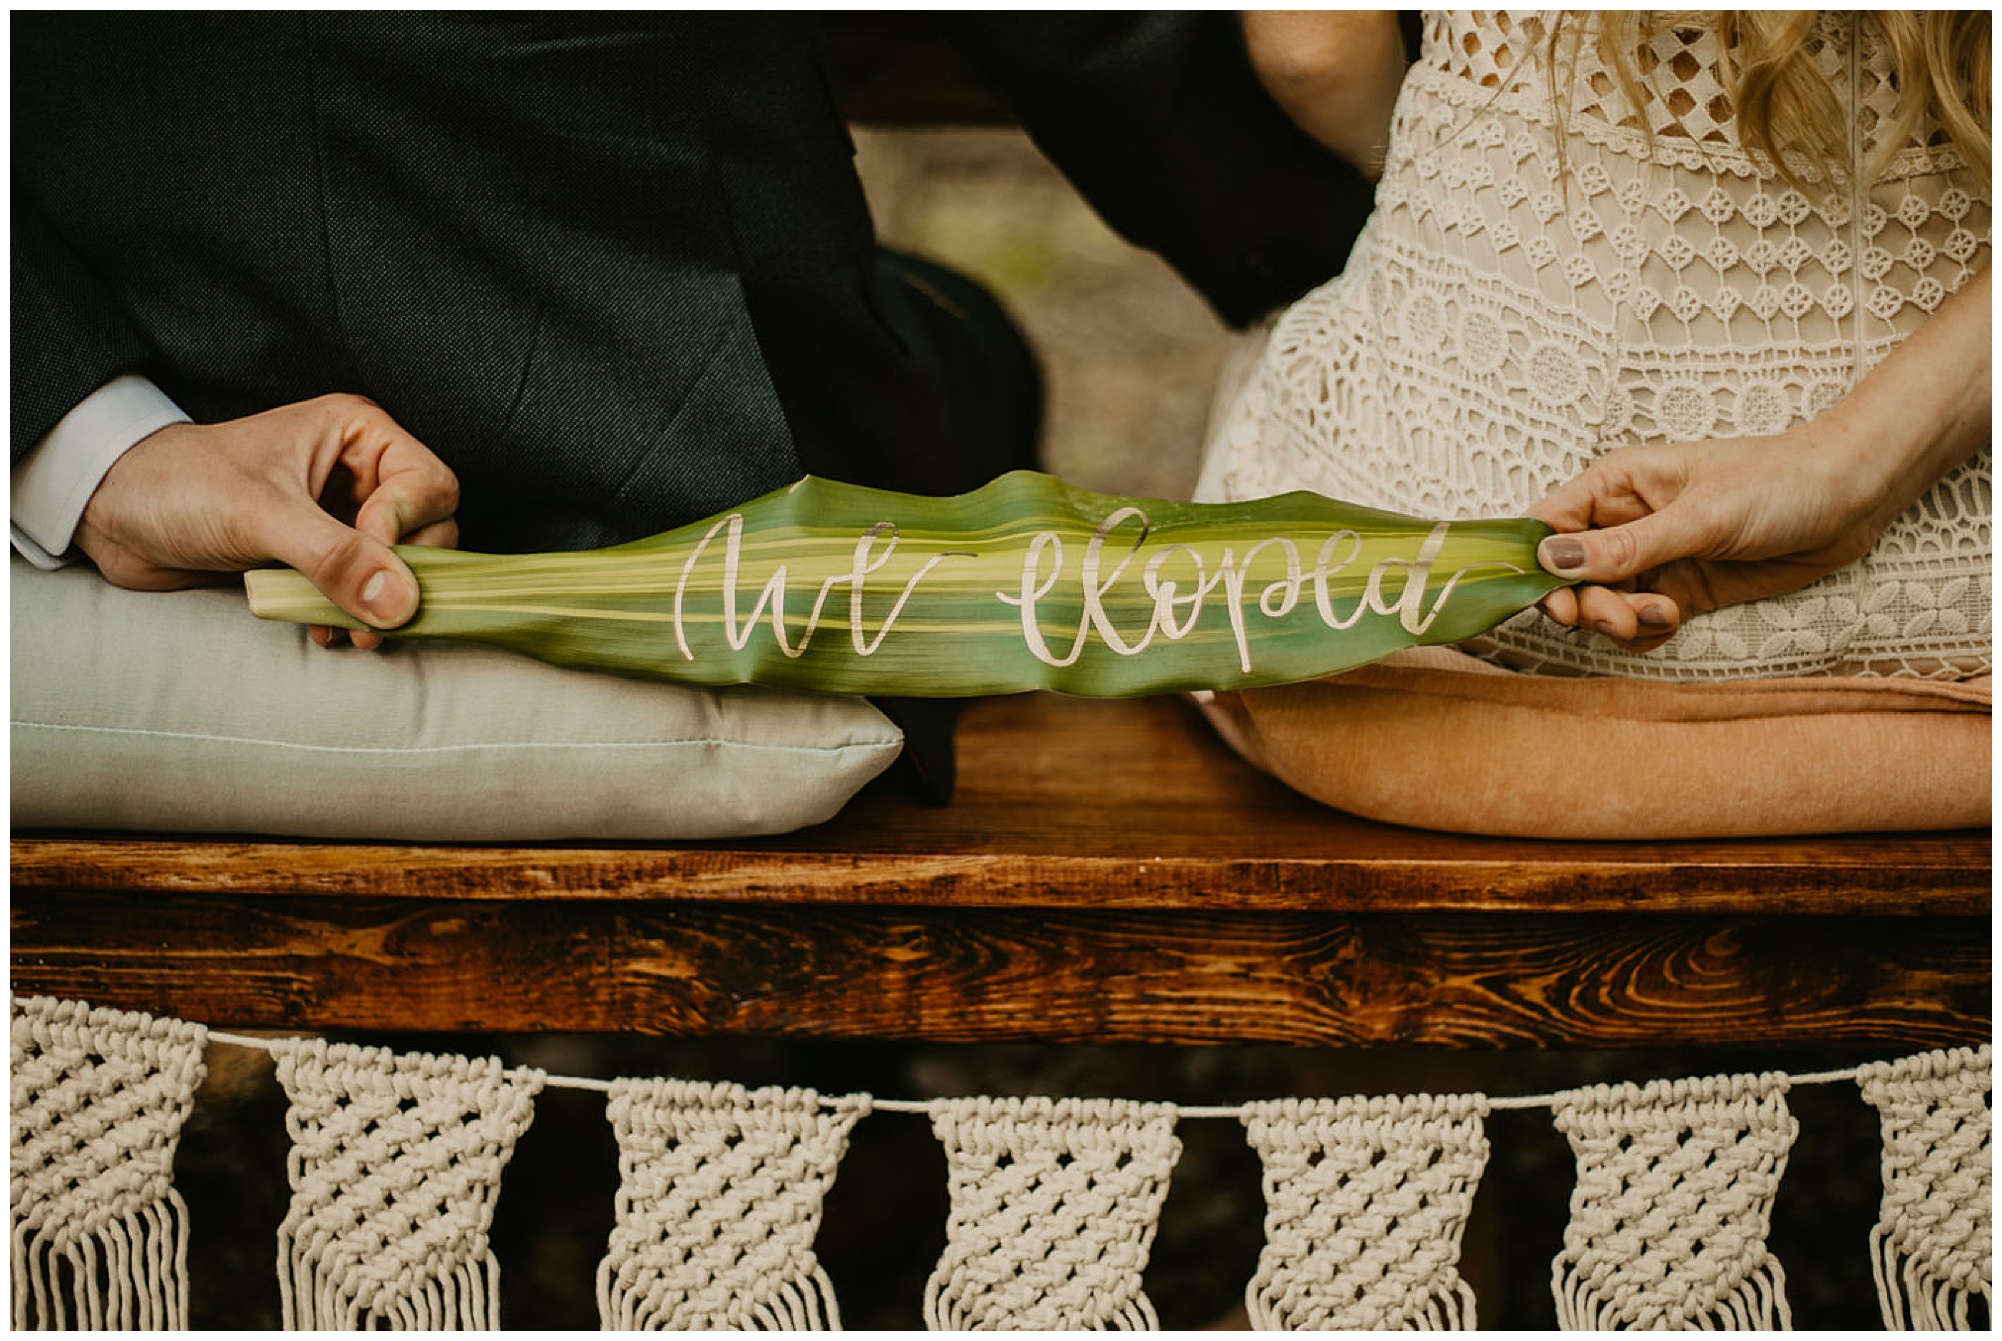 natural leaf signage for wedding or elopement inspo | carefree elopement with eco friendly style decor at prancing deer farm now featured on my eastern shore wedding blog